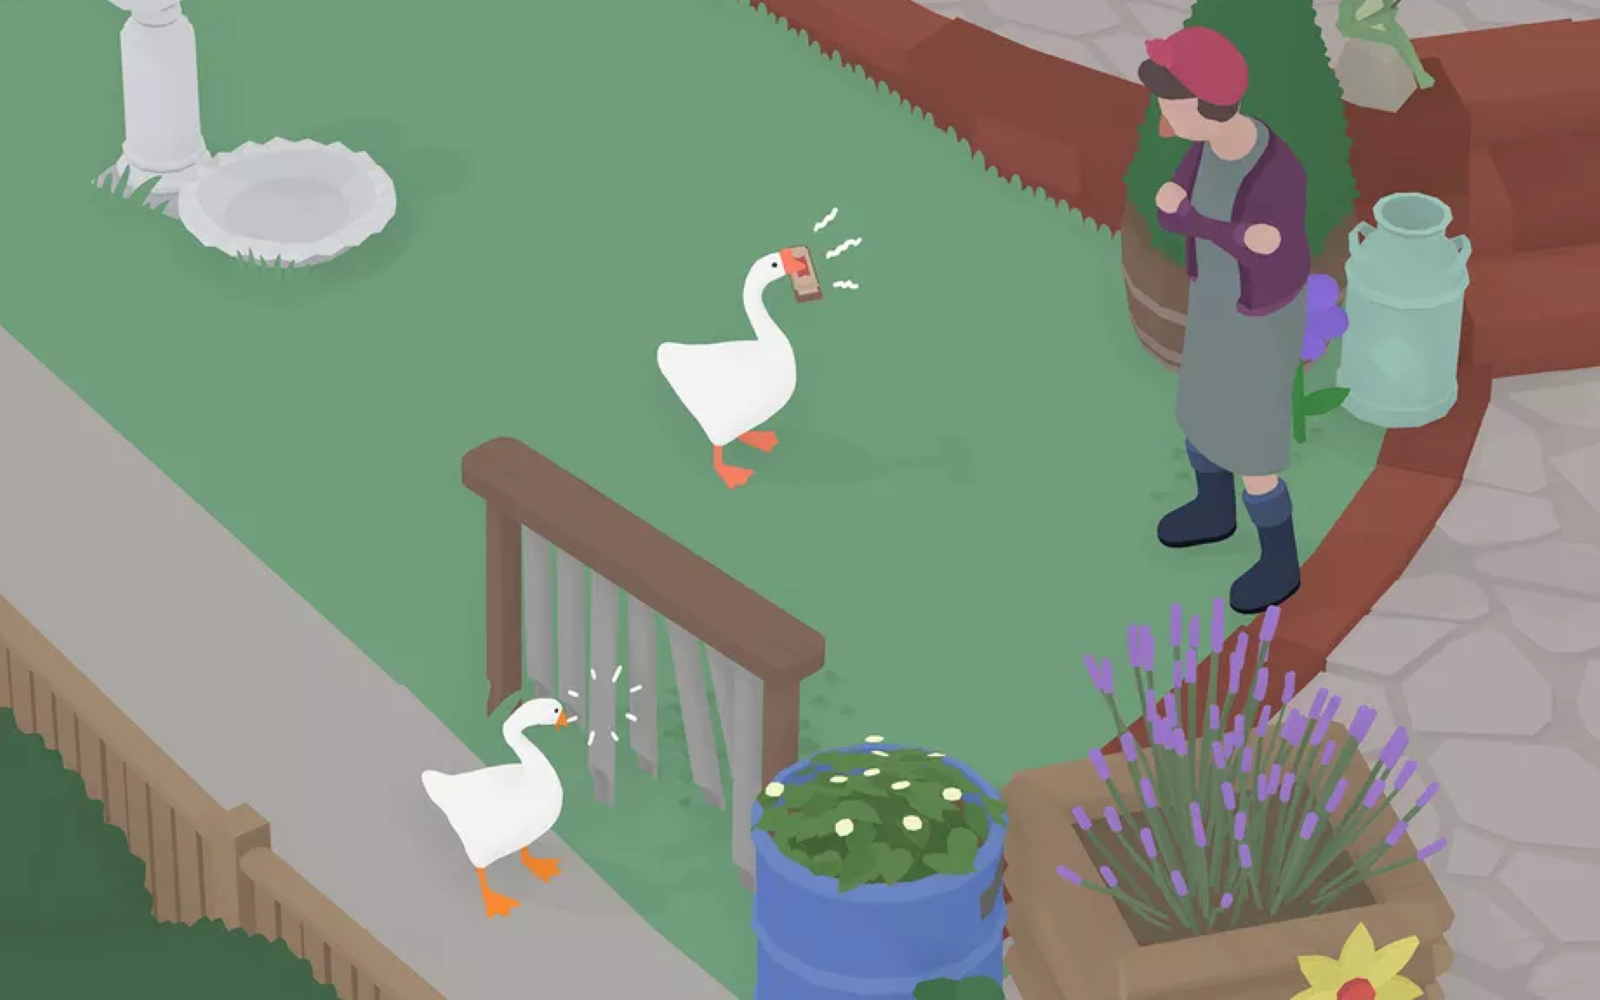 Untitled Goose Game Getting Free Co-Op Update